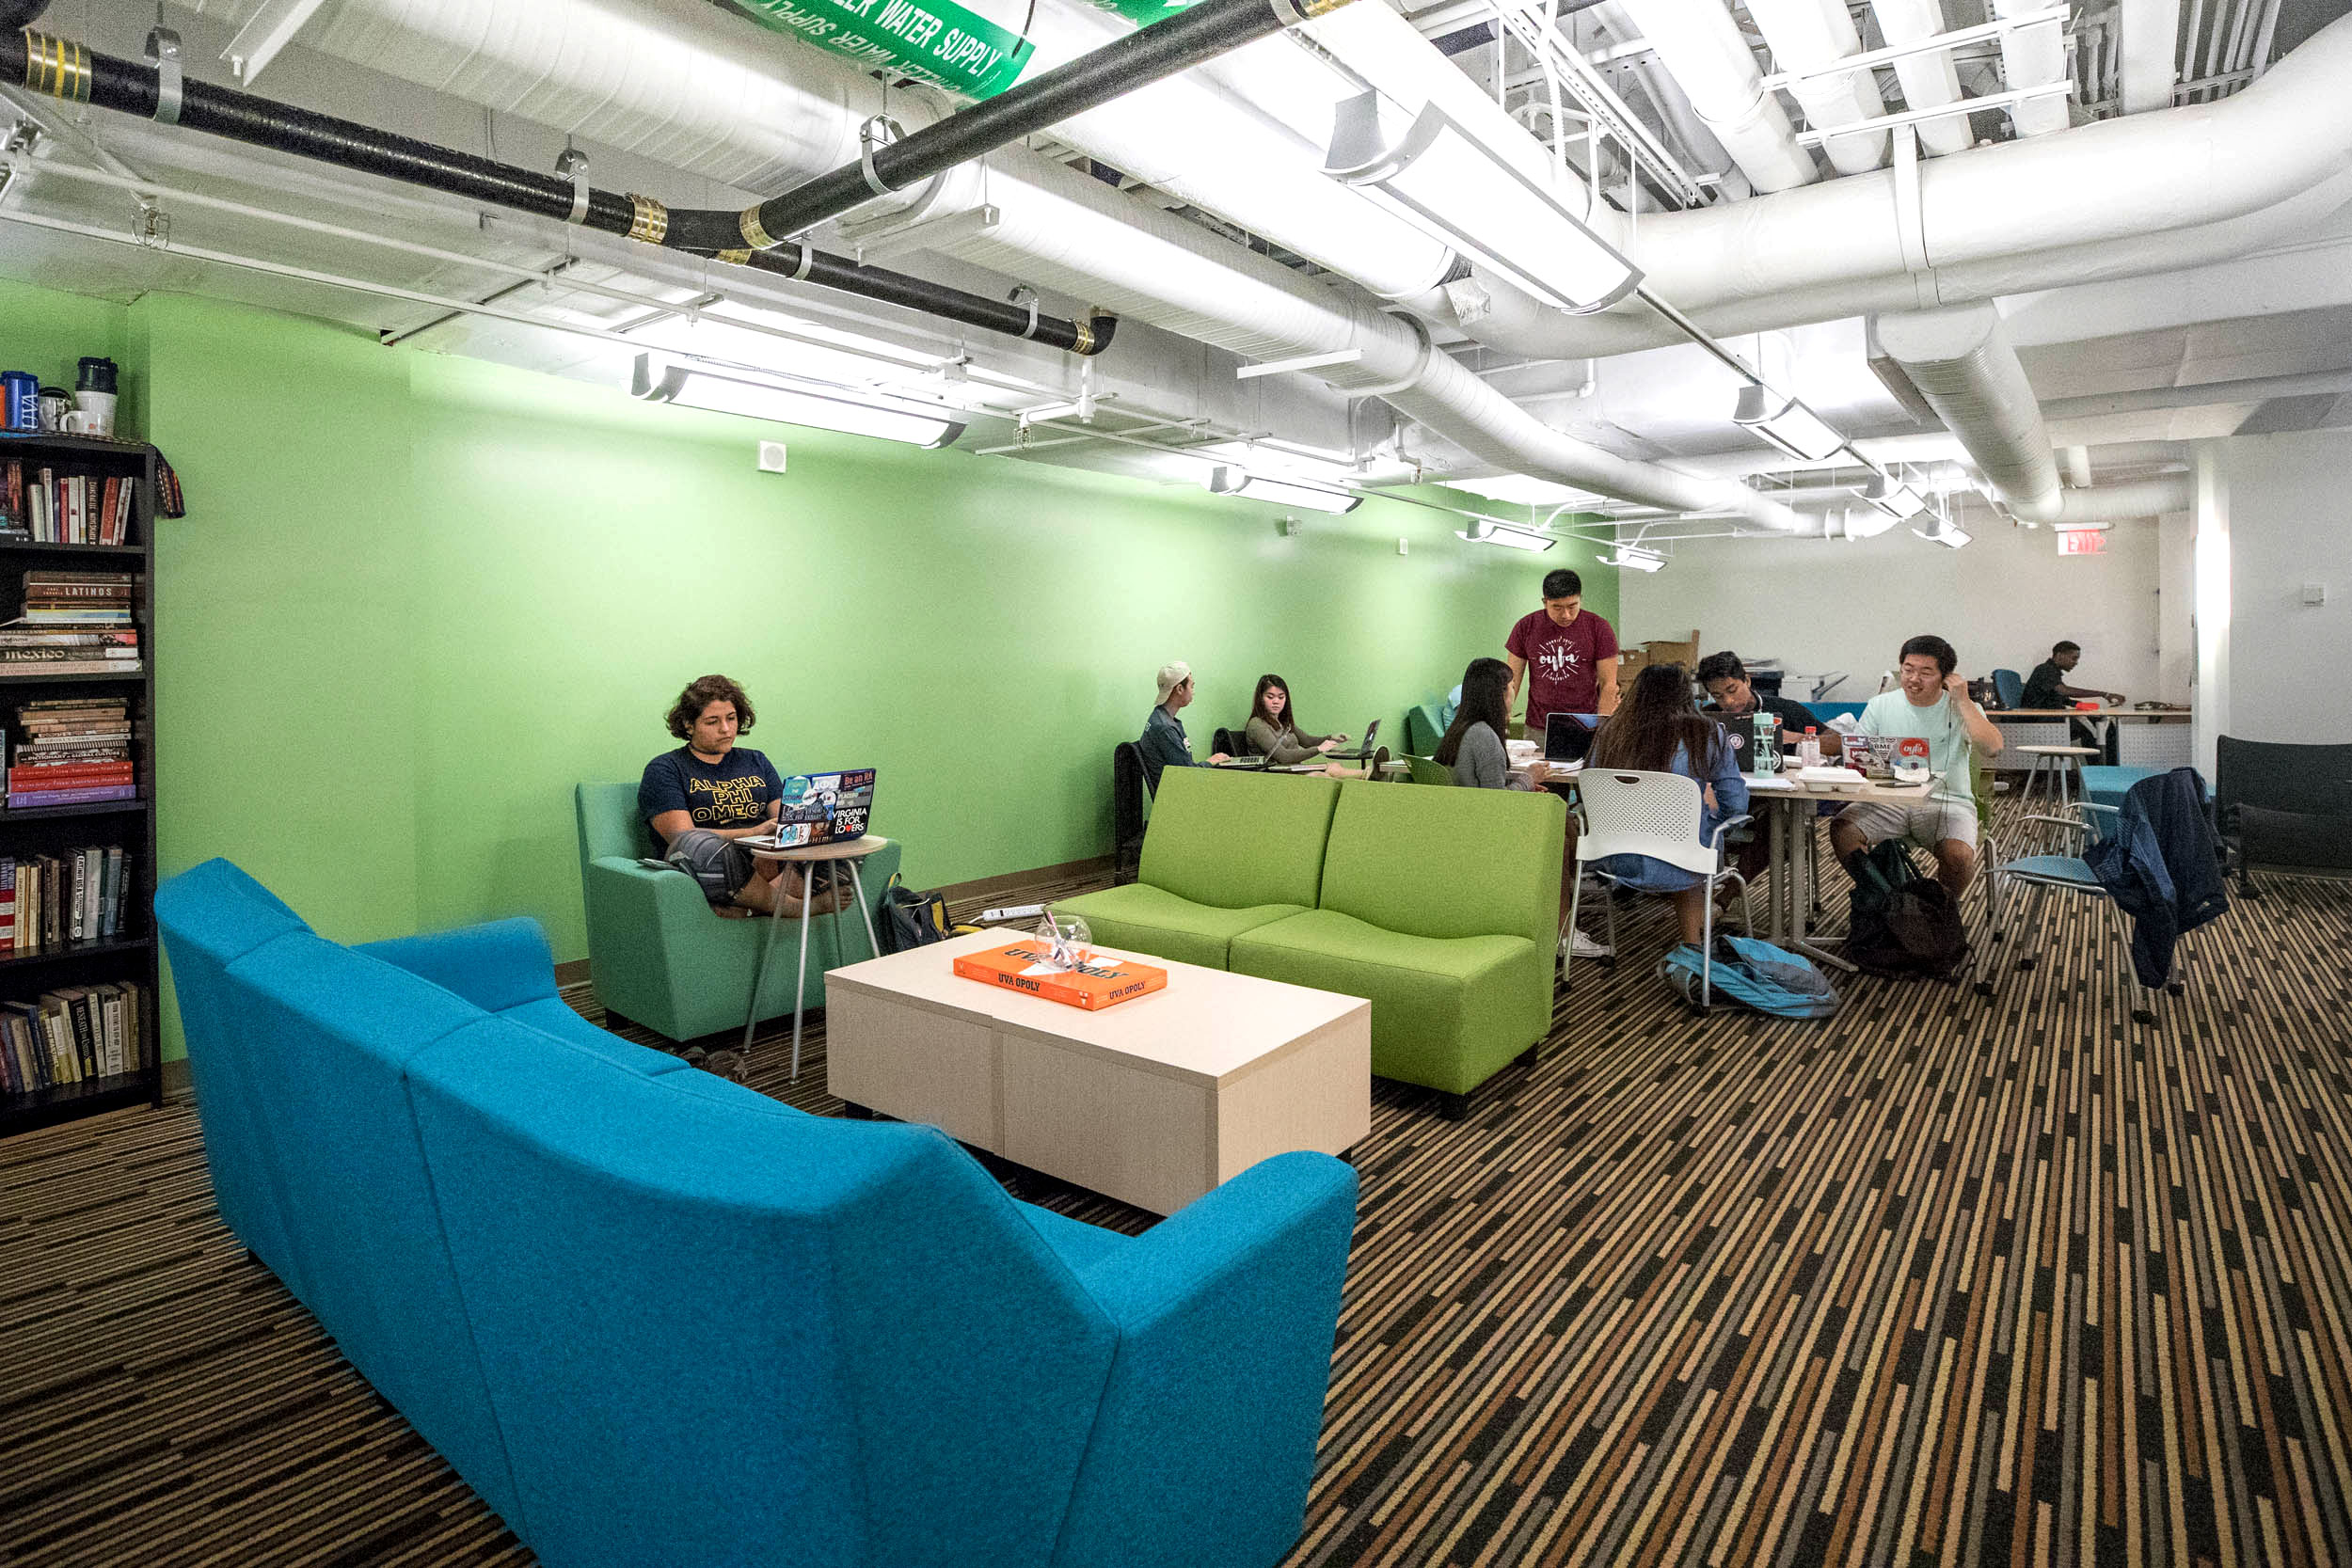 Students are already taking advantage of the Multicultural Center by using it as a place to study, collaborate, hold meetings and host events. (Photos by Sanjay Suchak, University Communications)